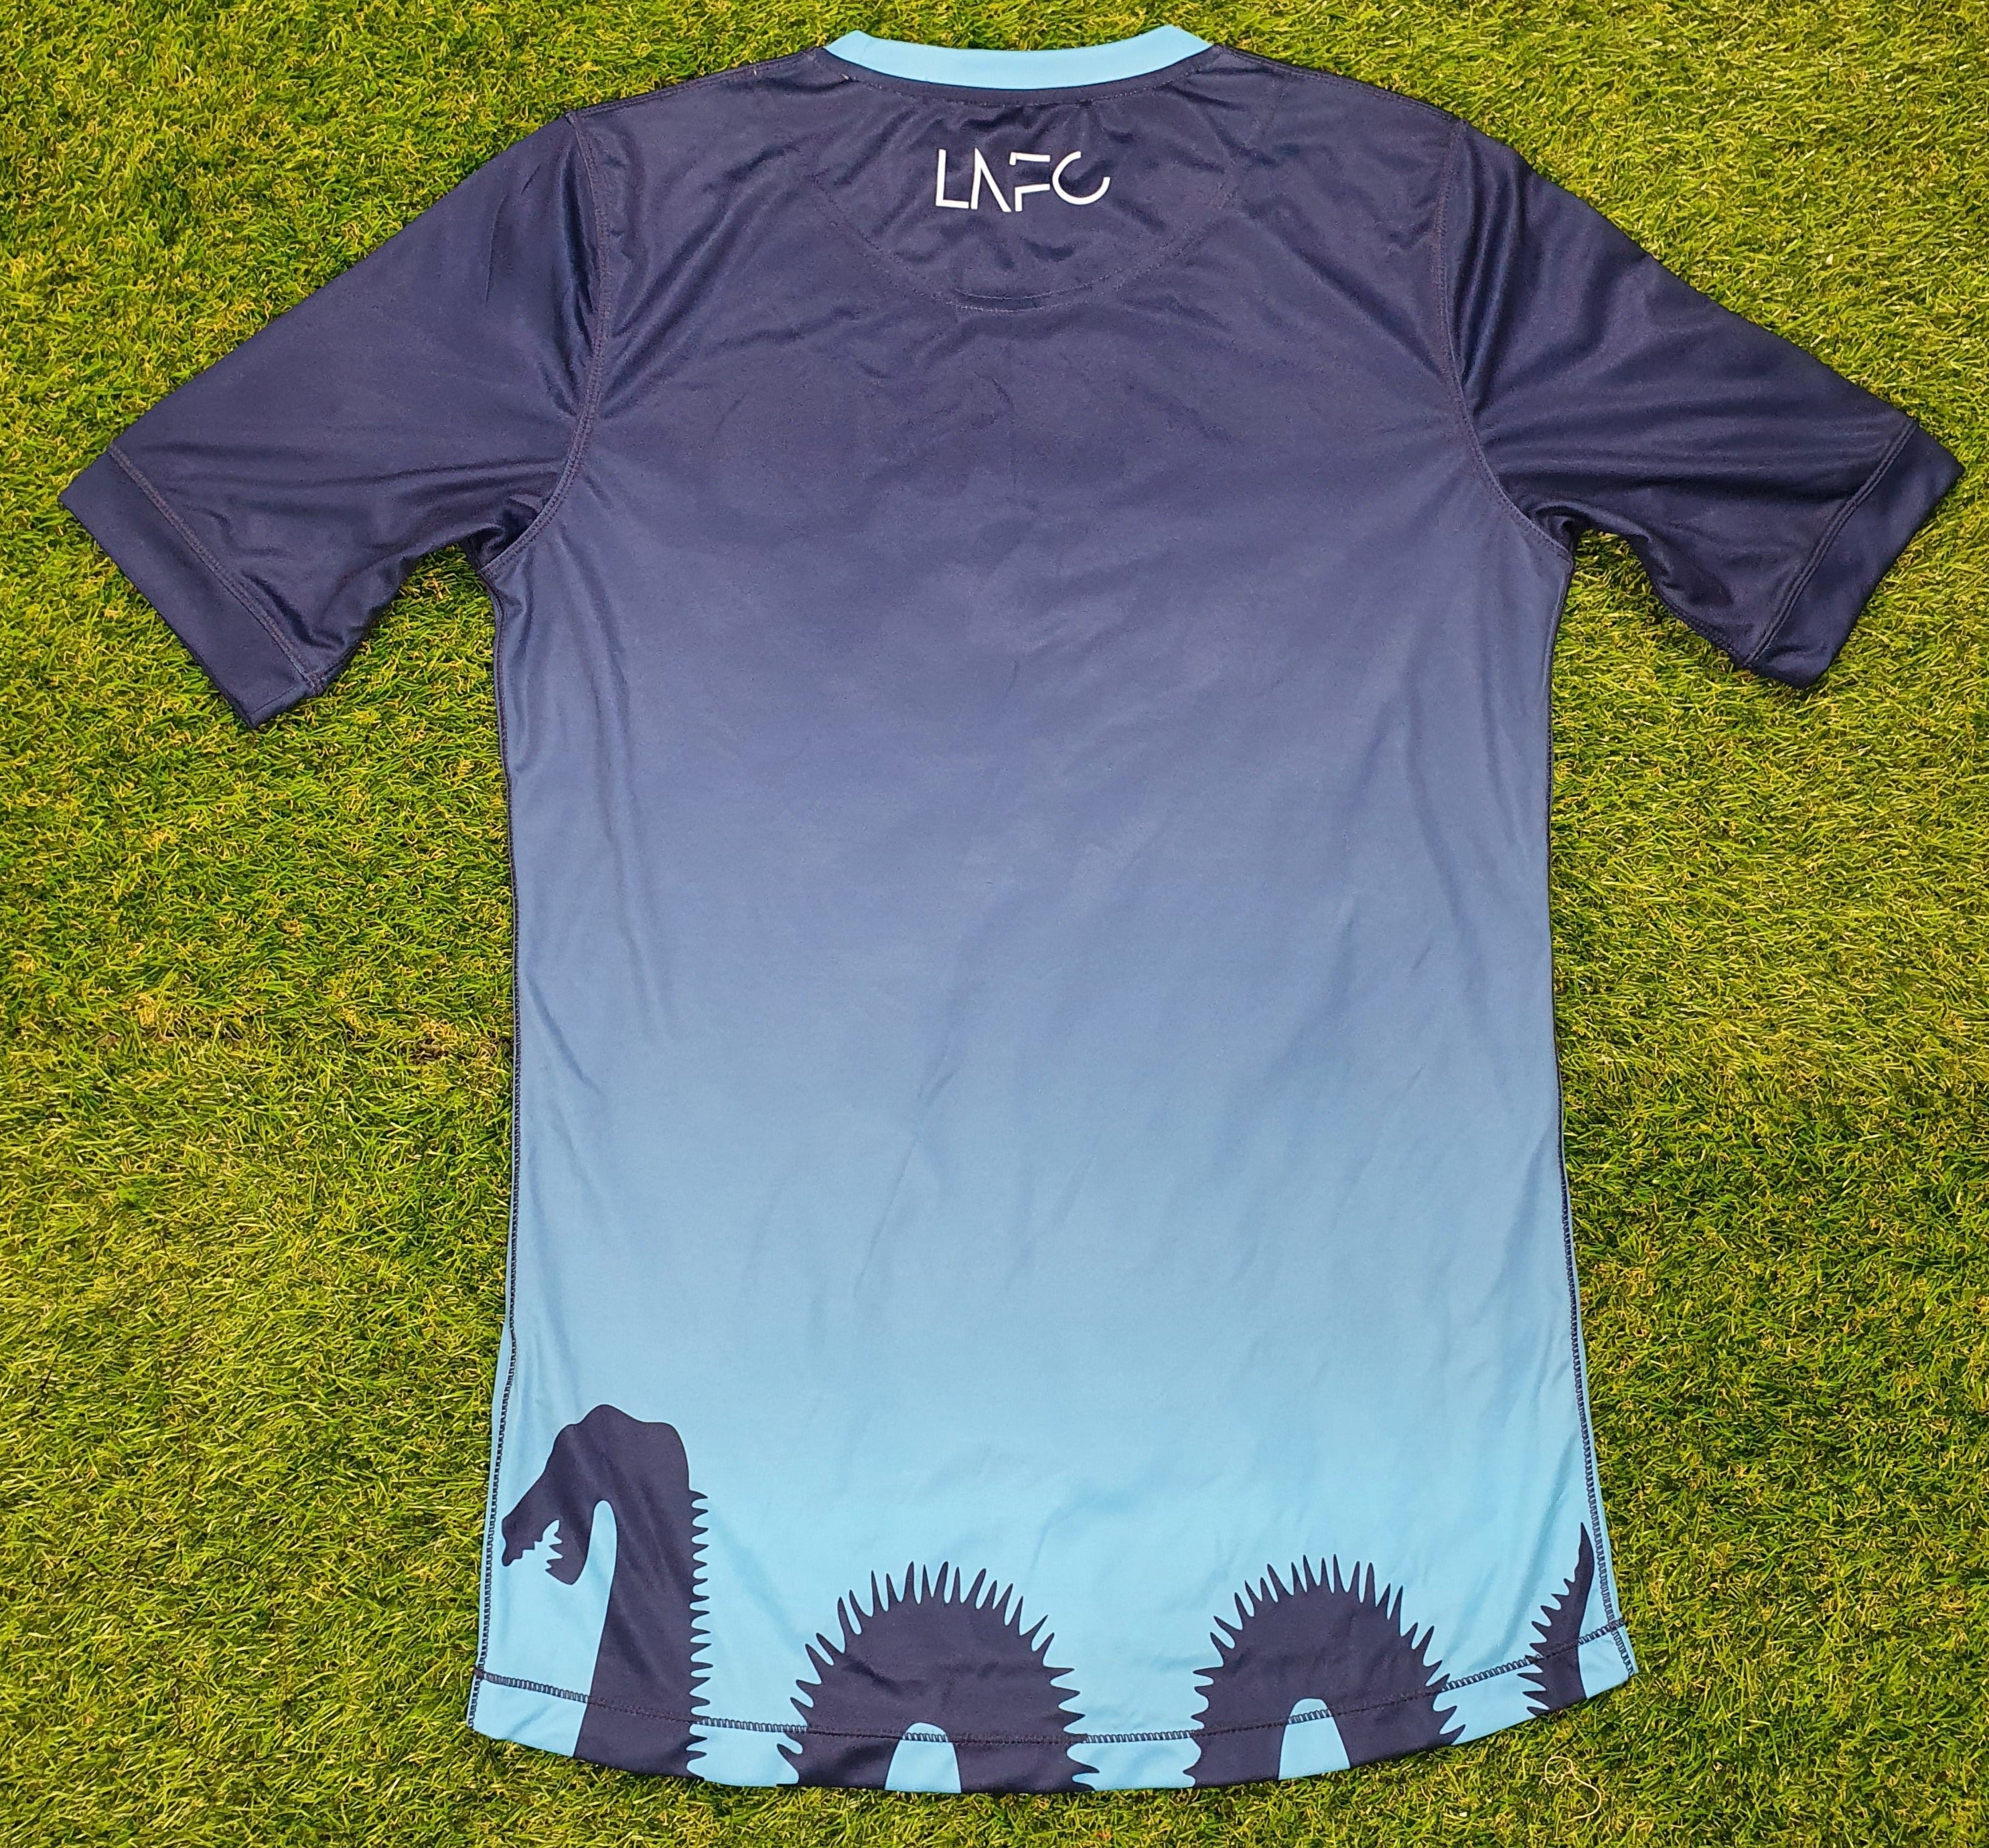 Loch Ness Football Jersey Third Kit 2020/21 - Back view showcasing player name and number, perfect for fans of the team.